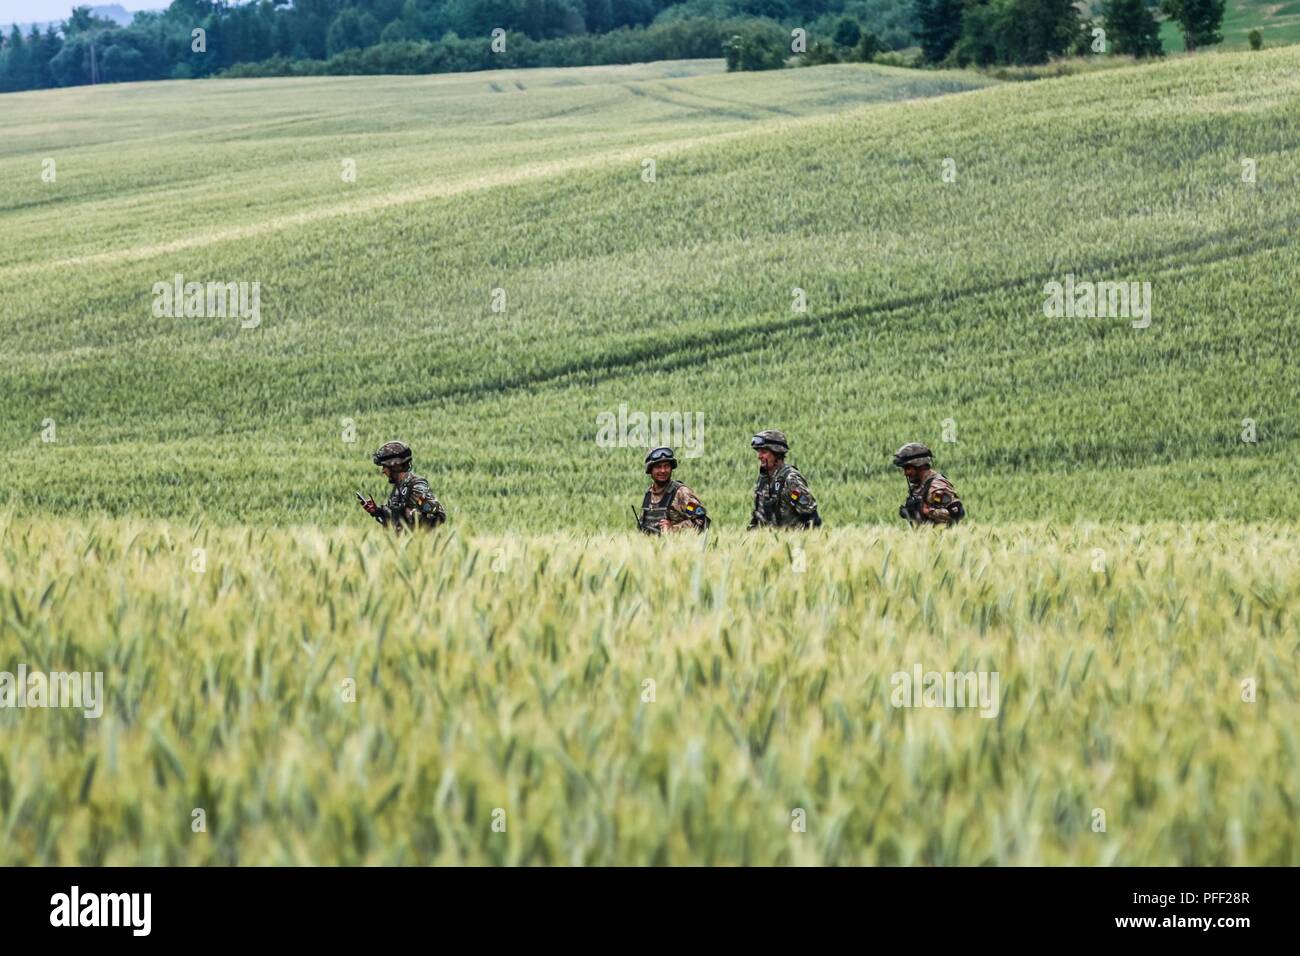 Romanian army soldiers with Air Defense Artillery “Blue Scorpions” Battery, preform reconnaissance on an area during a multinational quick response exercise, Bull Run 5.5, with Battle Group Poland at Olecko, Poland on June 11, 2018 as part of Saber Strike 18. This year's exercise, which runs from June 3-15, tests allies and partners from 19 countries on their ability work together to deter aggression in the region and improve each unit's ability to perform their designated mission. Stock Photo